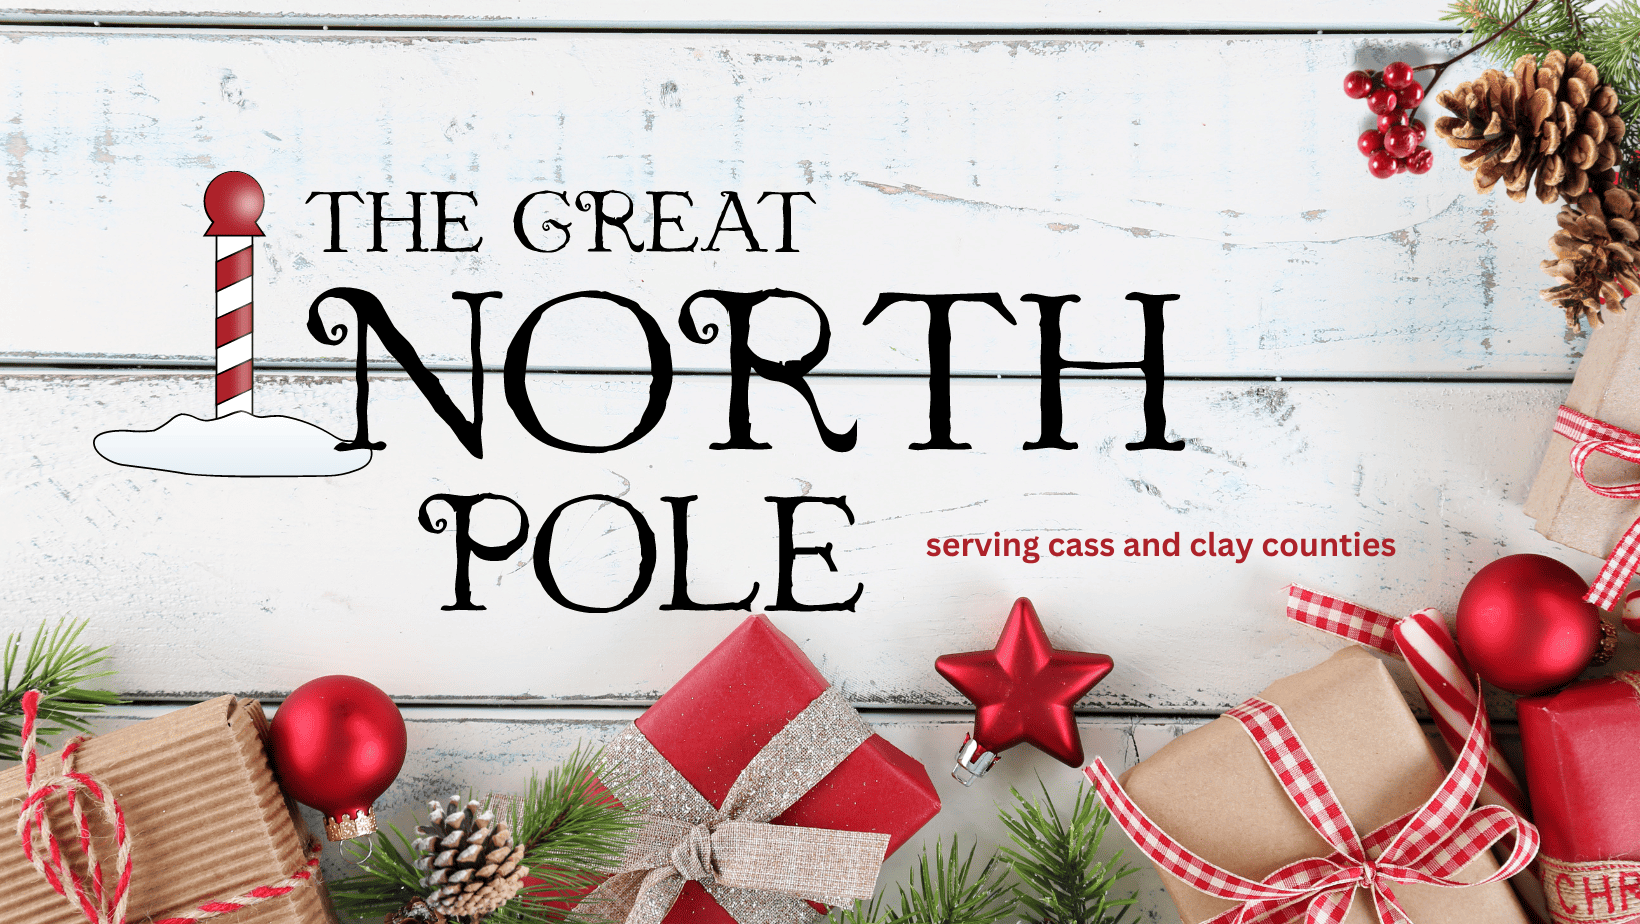 The Great North Pole serving Cass and Clay Counties in North Dakota